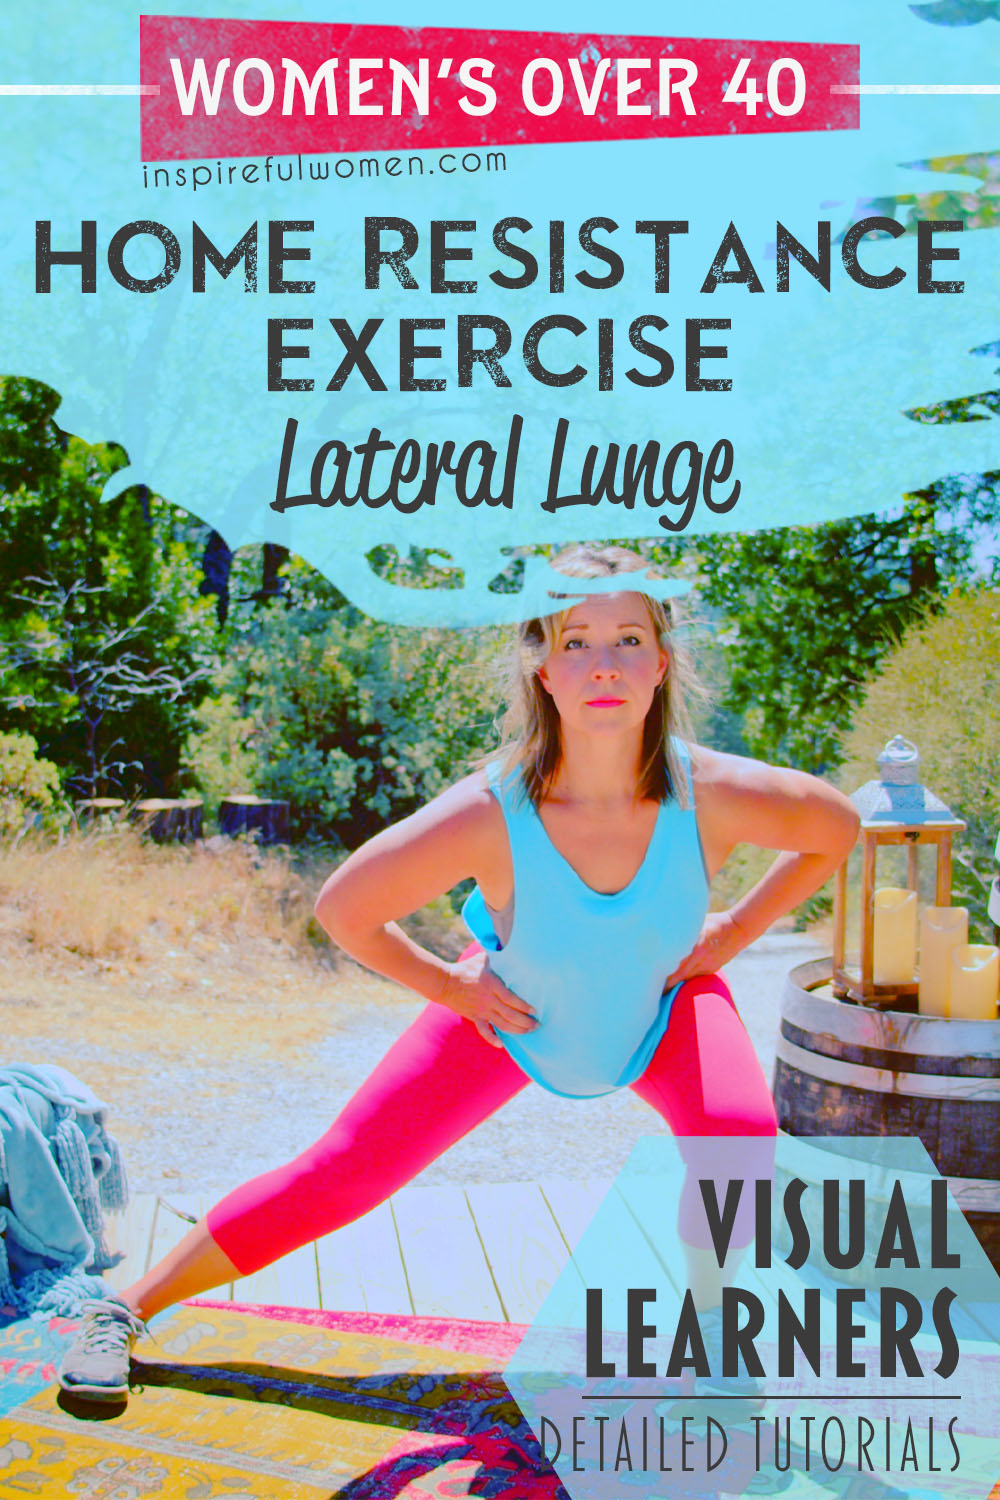 lateral-lunge-split-squat-inner-thigh-quadriceps-adductor-glutes-exercise-women-over-40